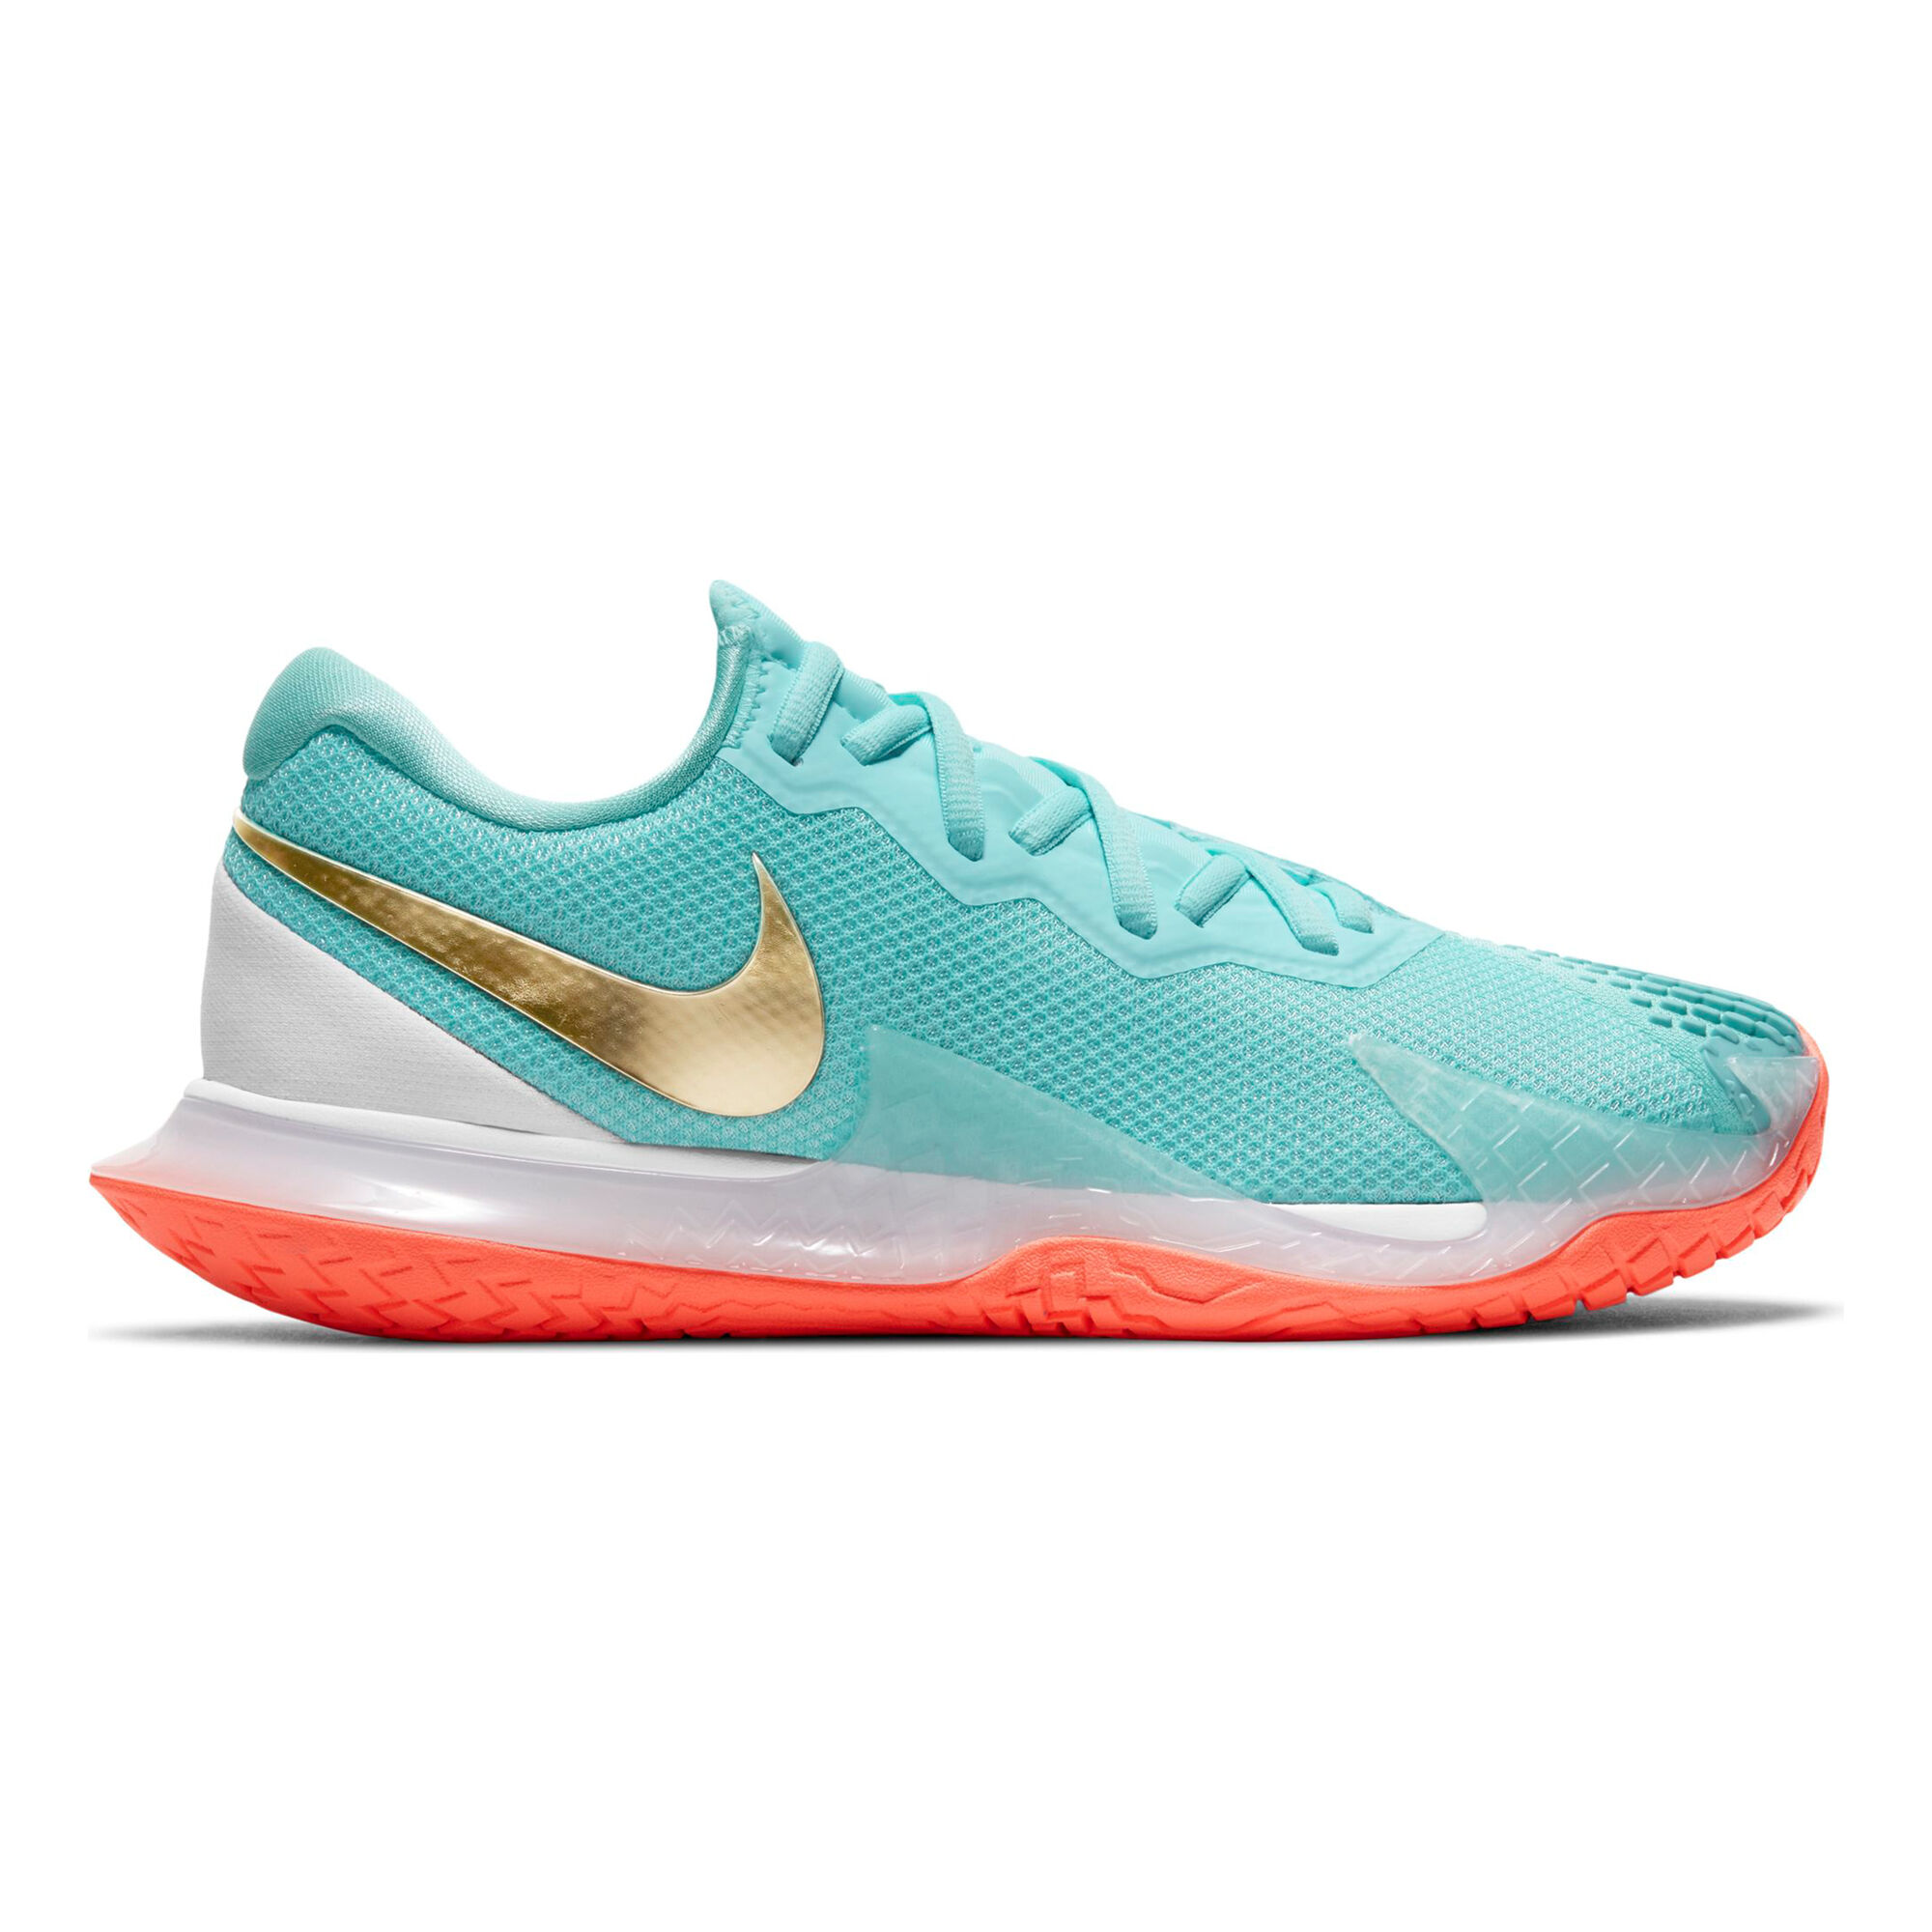 Buy Nike Air Zoom Vapor Cage 4 All Court Shoe Women Turquoise, Gold ...